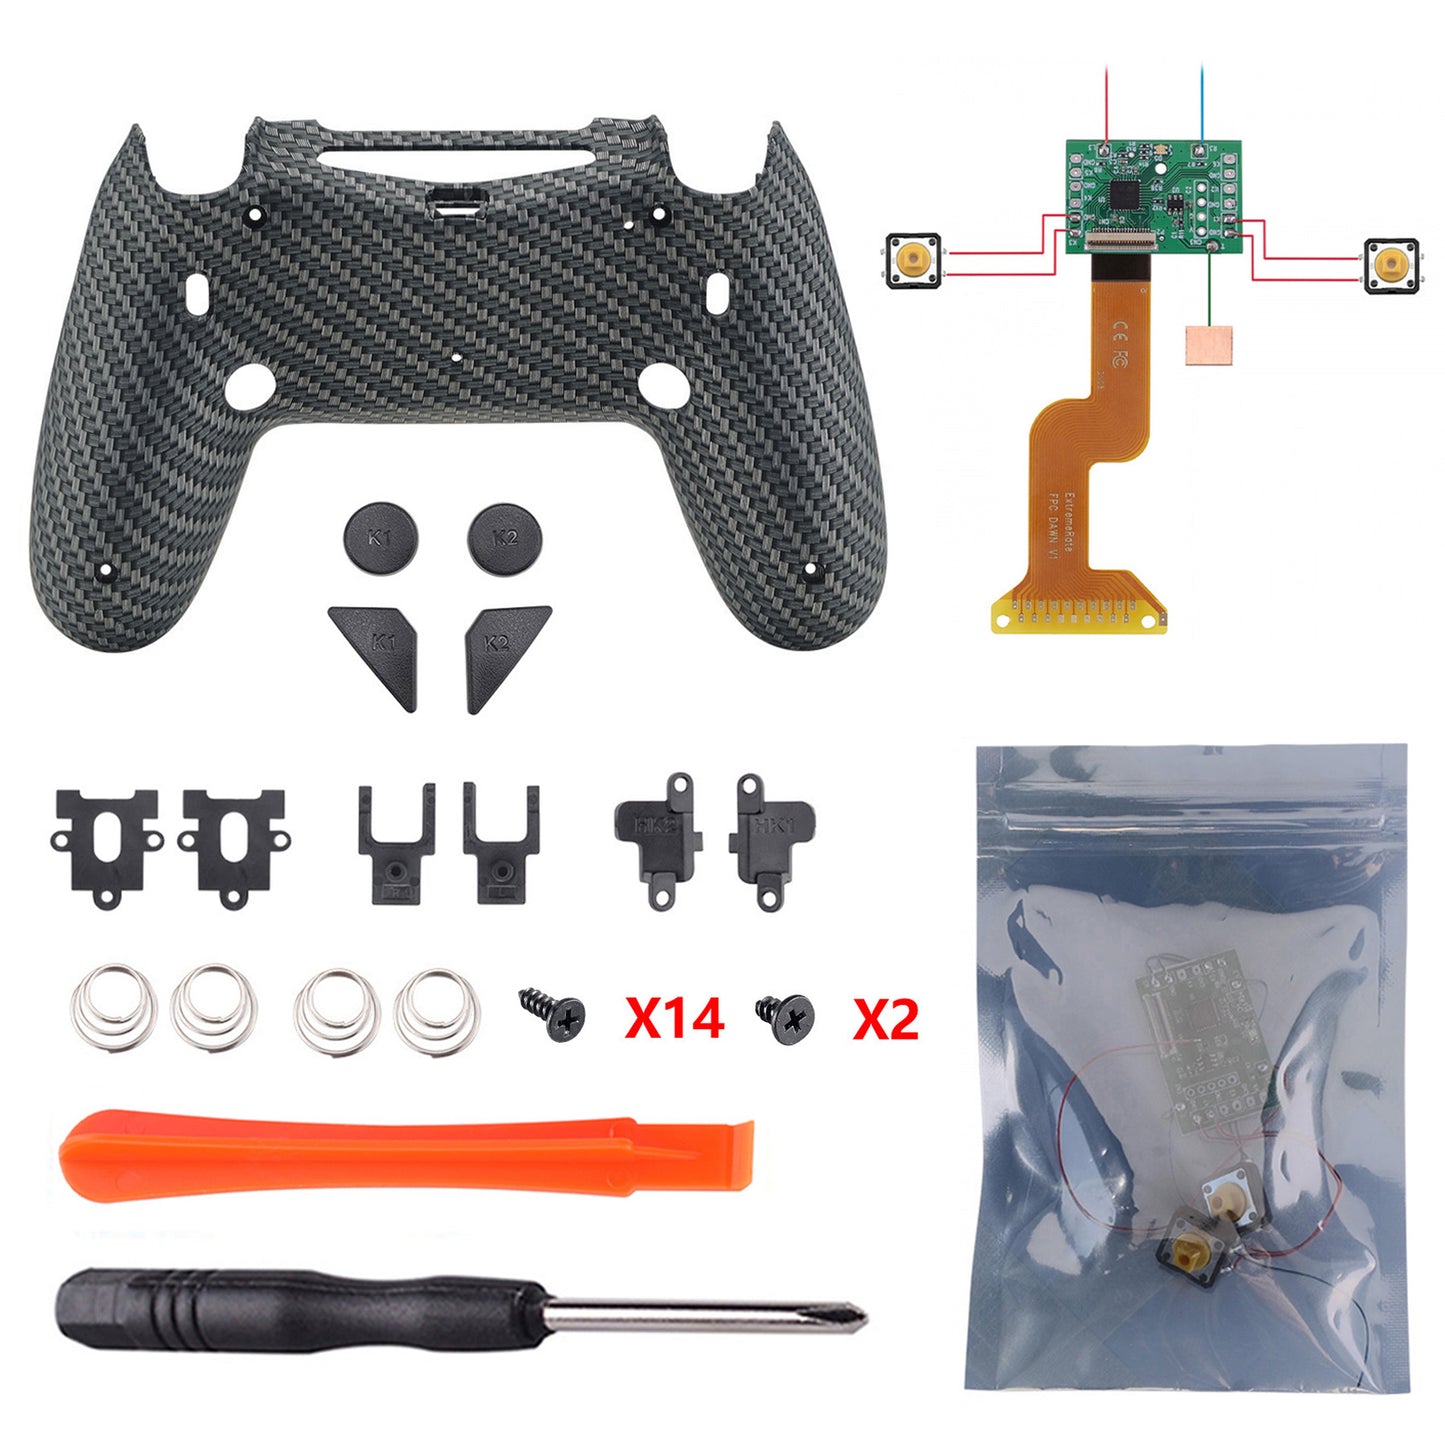 FlashShot Remap JDM for eXtremeRate Back & PS4 CUH-ZCT2 040/050/055 – Shell Kit Stop 2.0 Trigger for Controller Upgrade Back Trigger ps4 Redesigned Buttons Controller, Dawn Carbon Board & & Lock Fiber